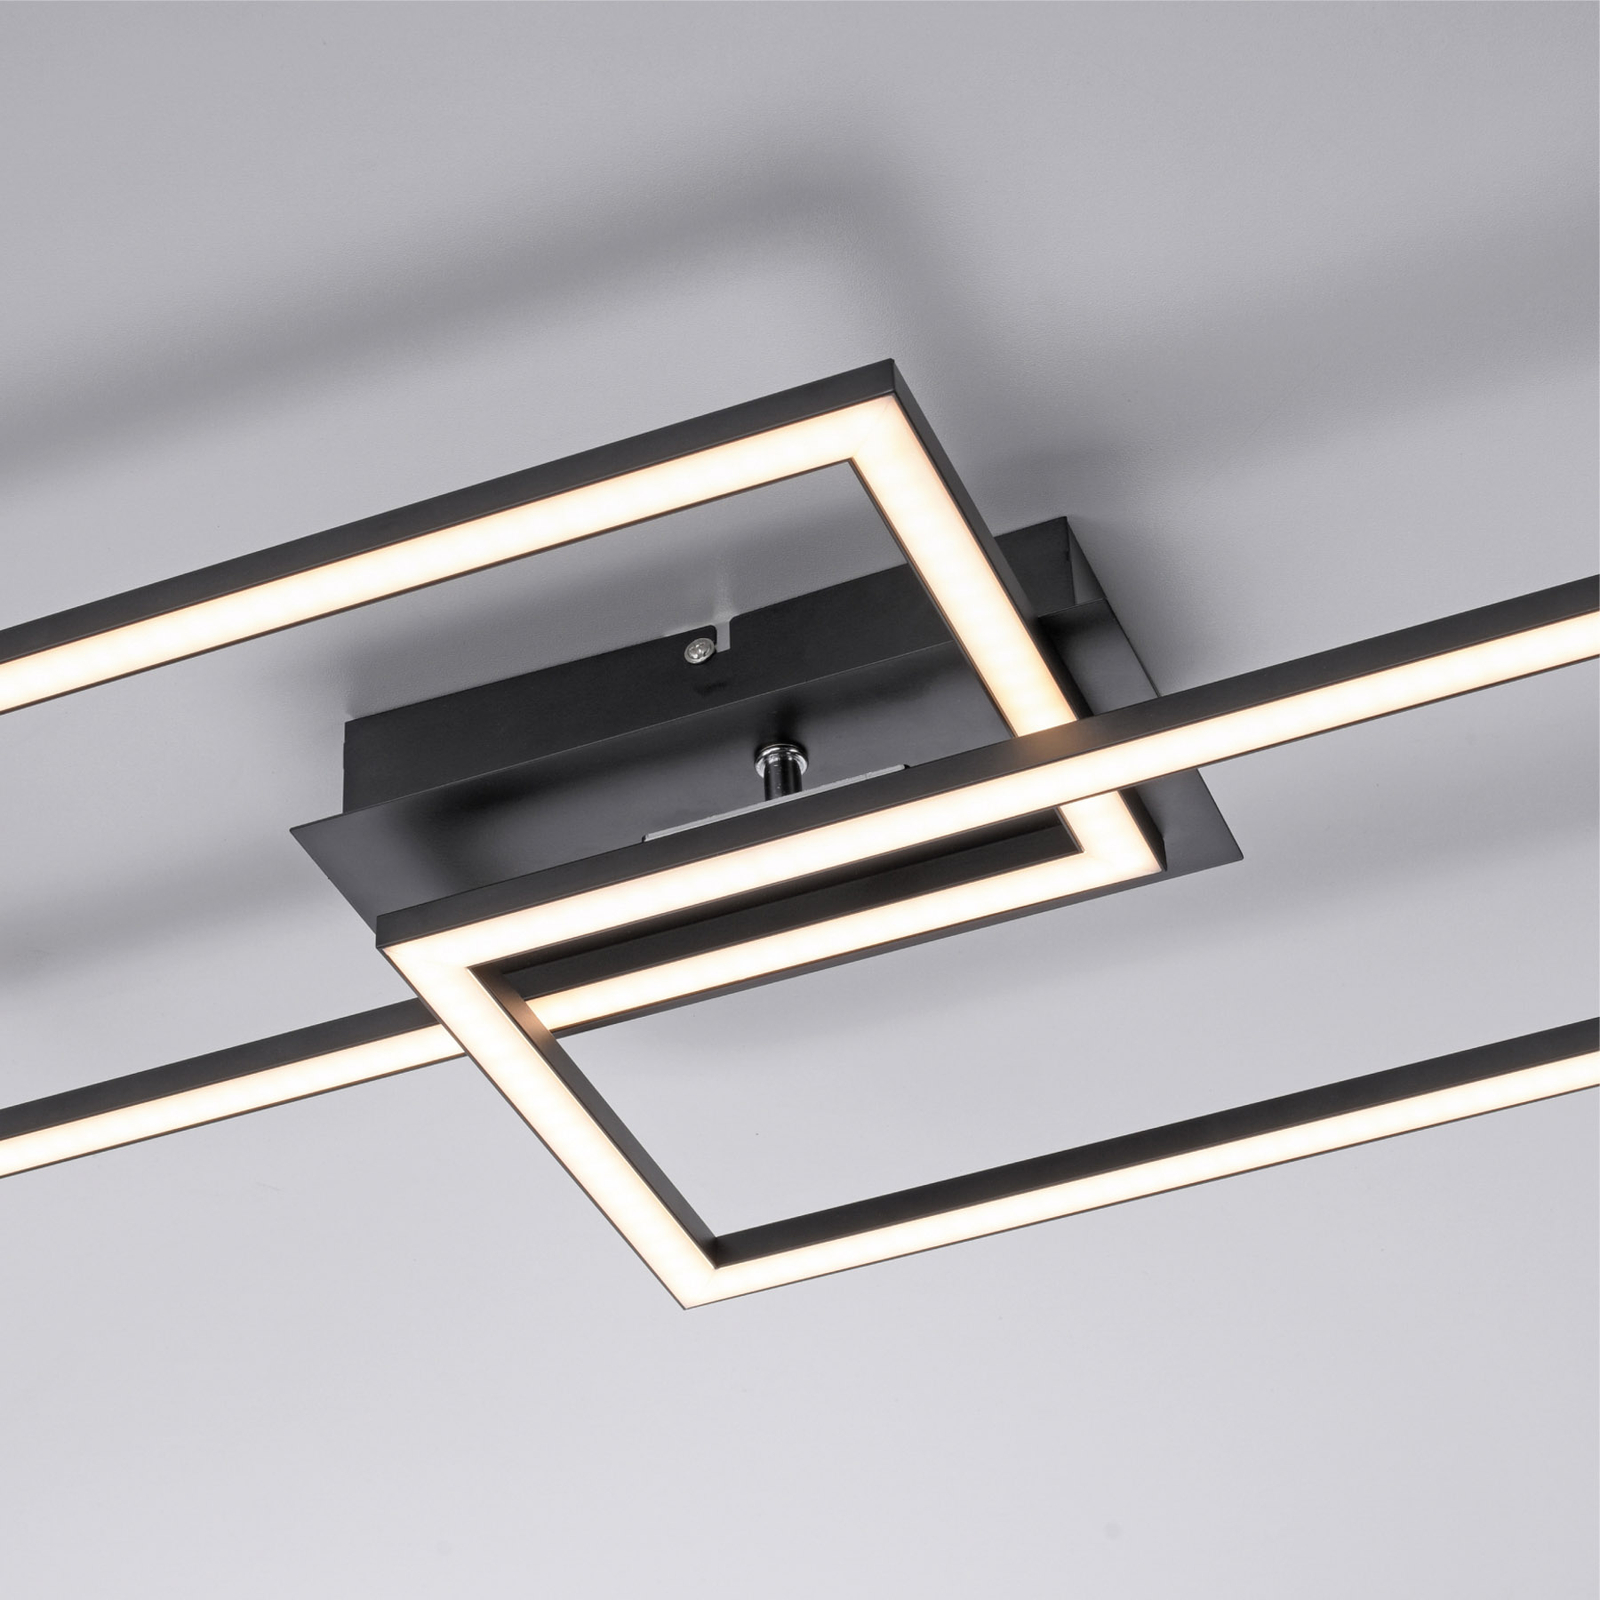 LED ceiling light Iven, dimmable, black, 54x31cm